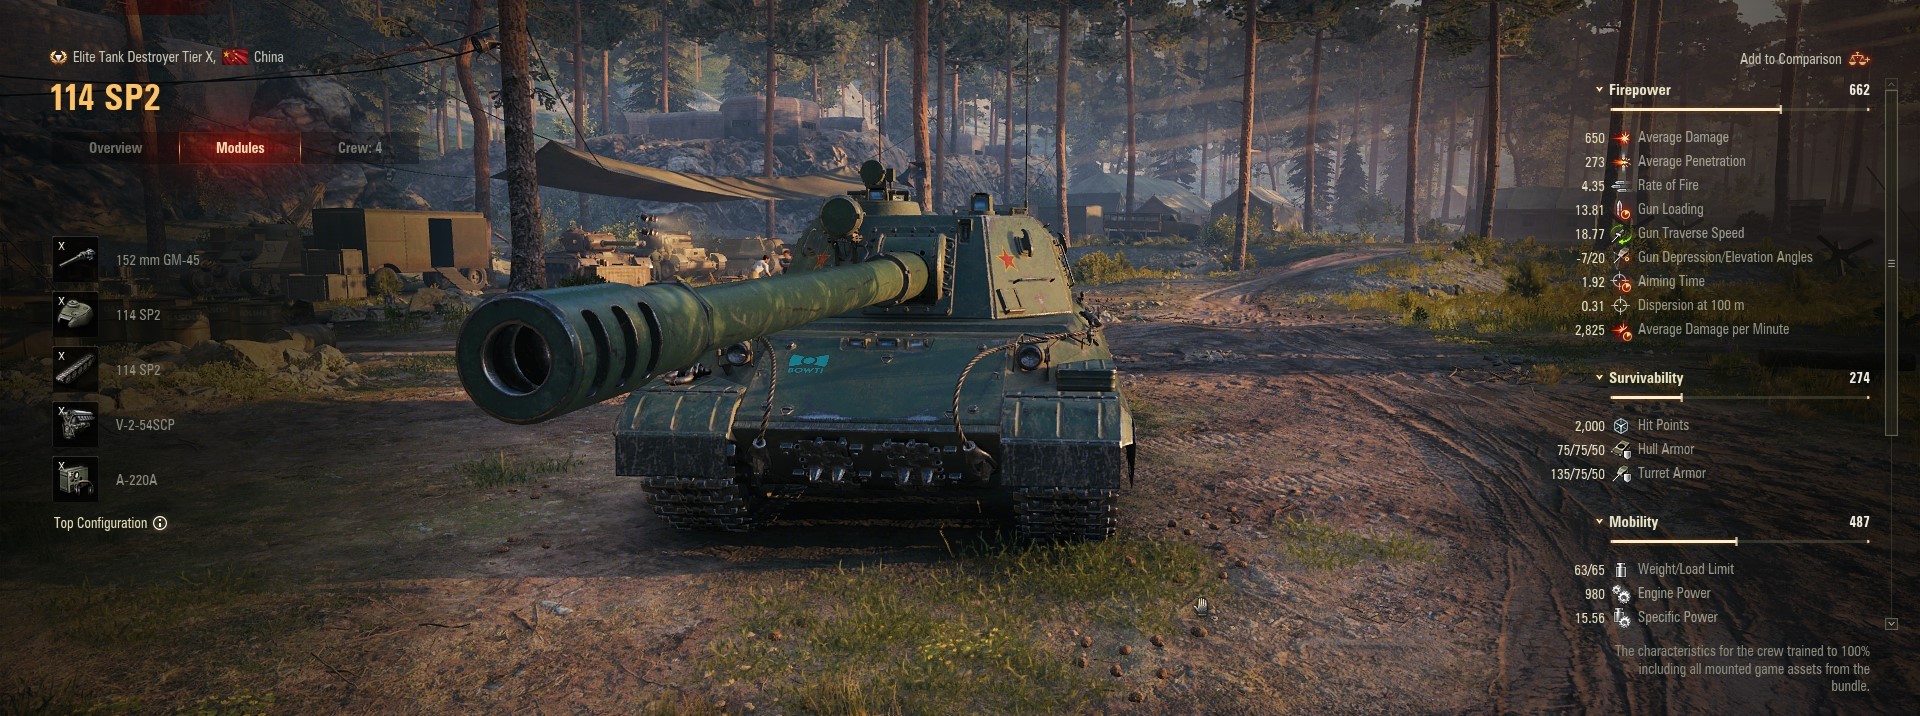 World of Tanks - The Chinese Tier X tank destroyer 114 SP2 will